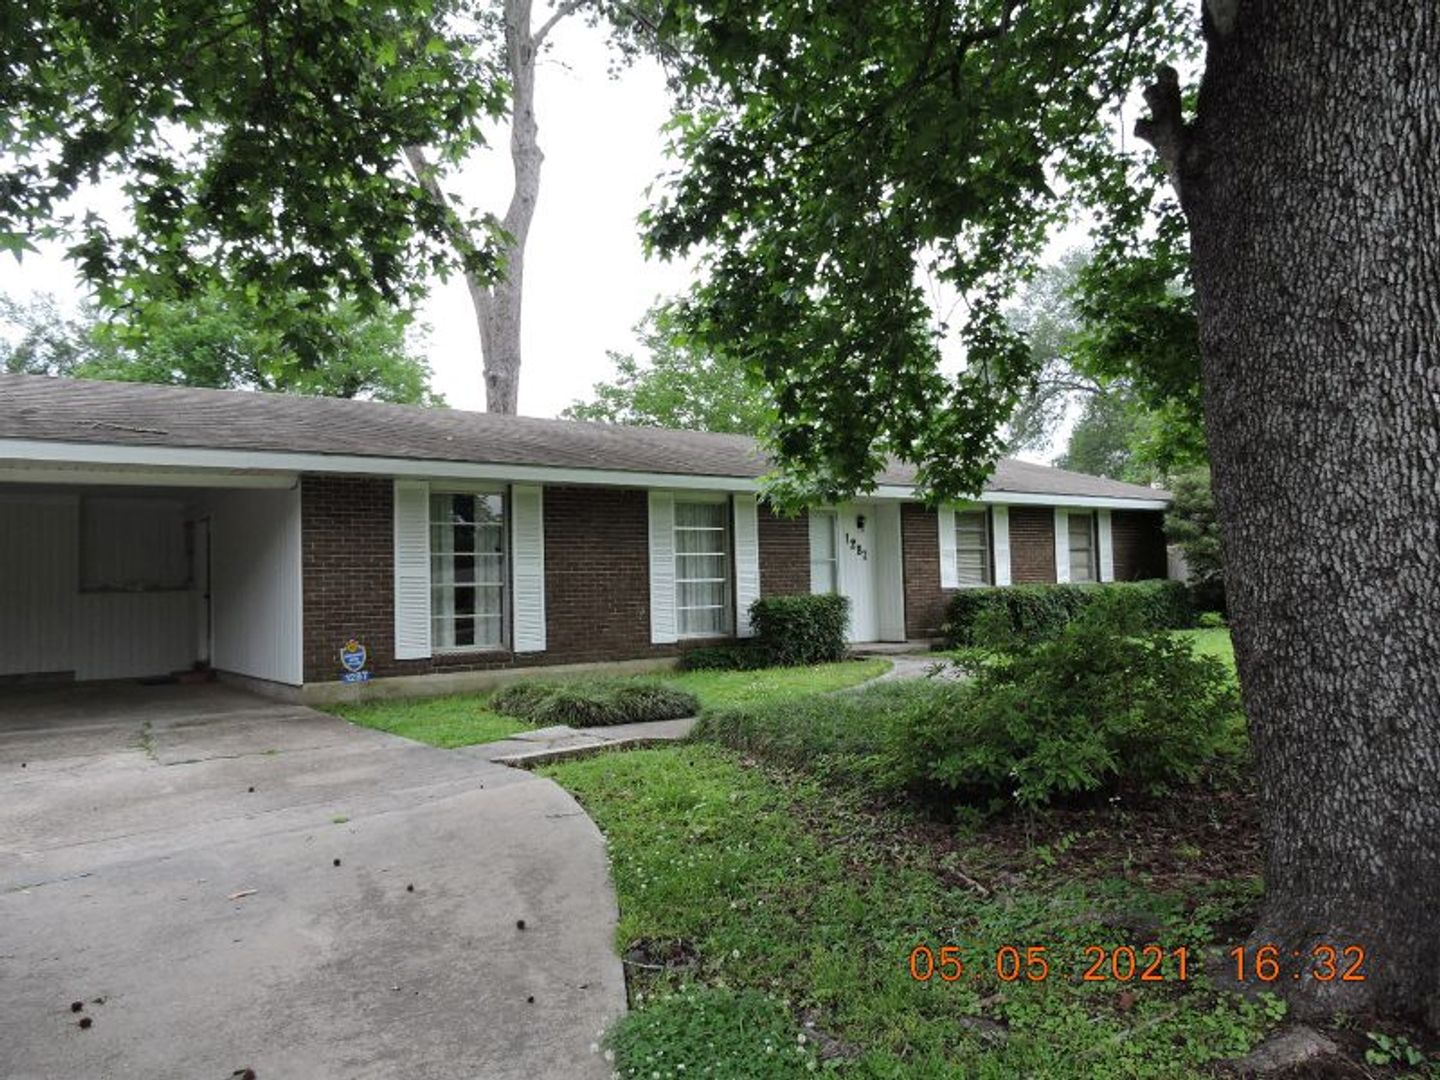 Magnolia Woods - Rodney Drive 3BR/2BA Home for Lease